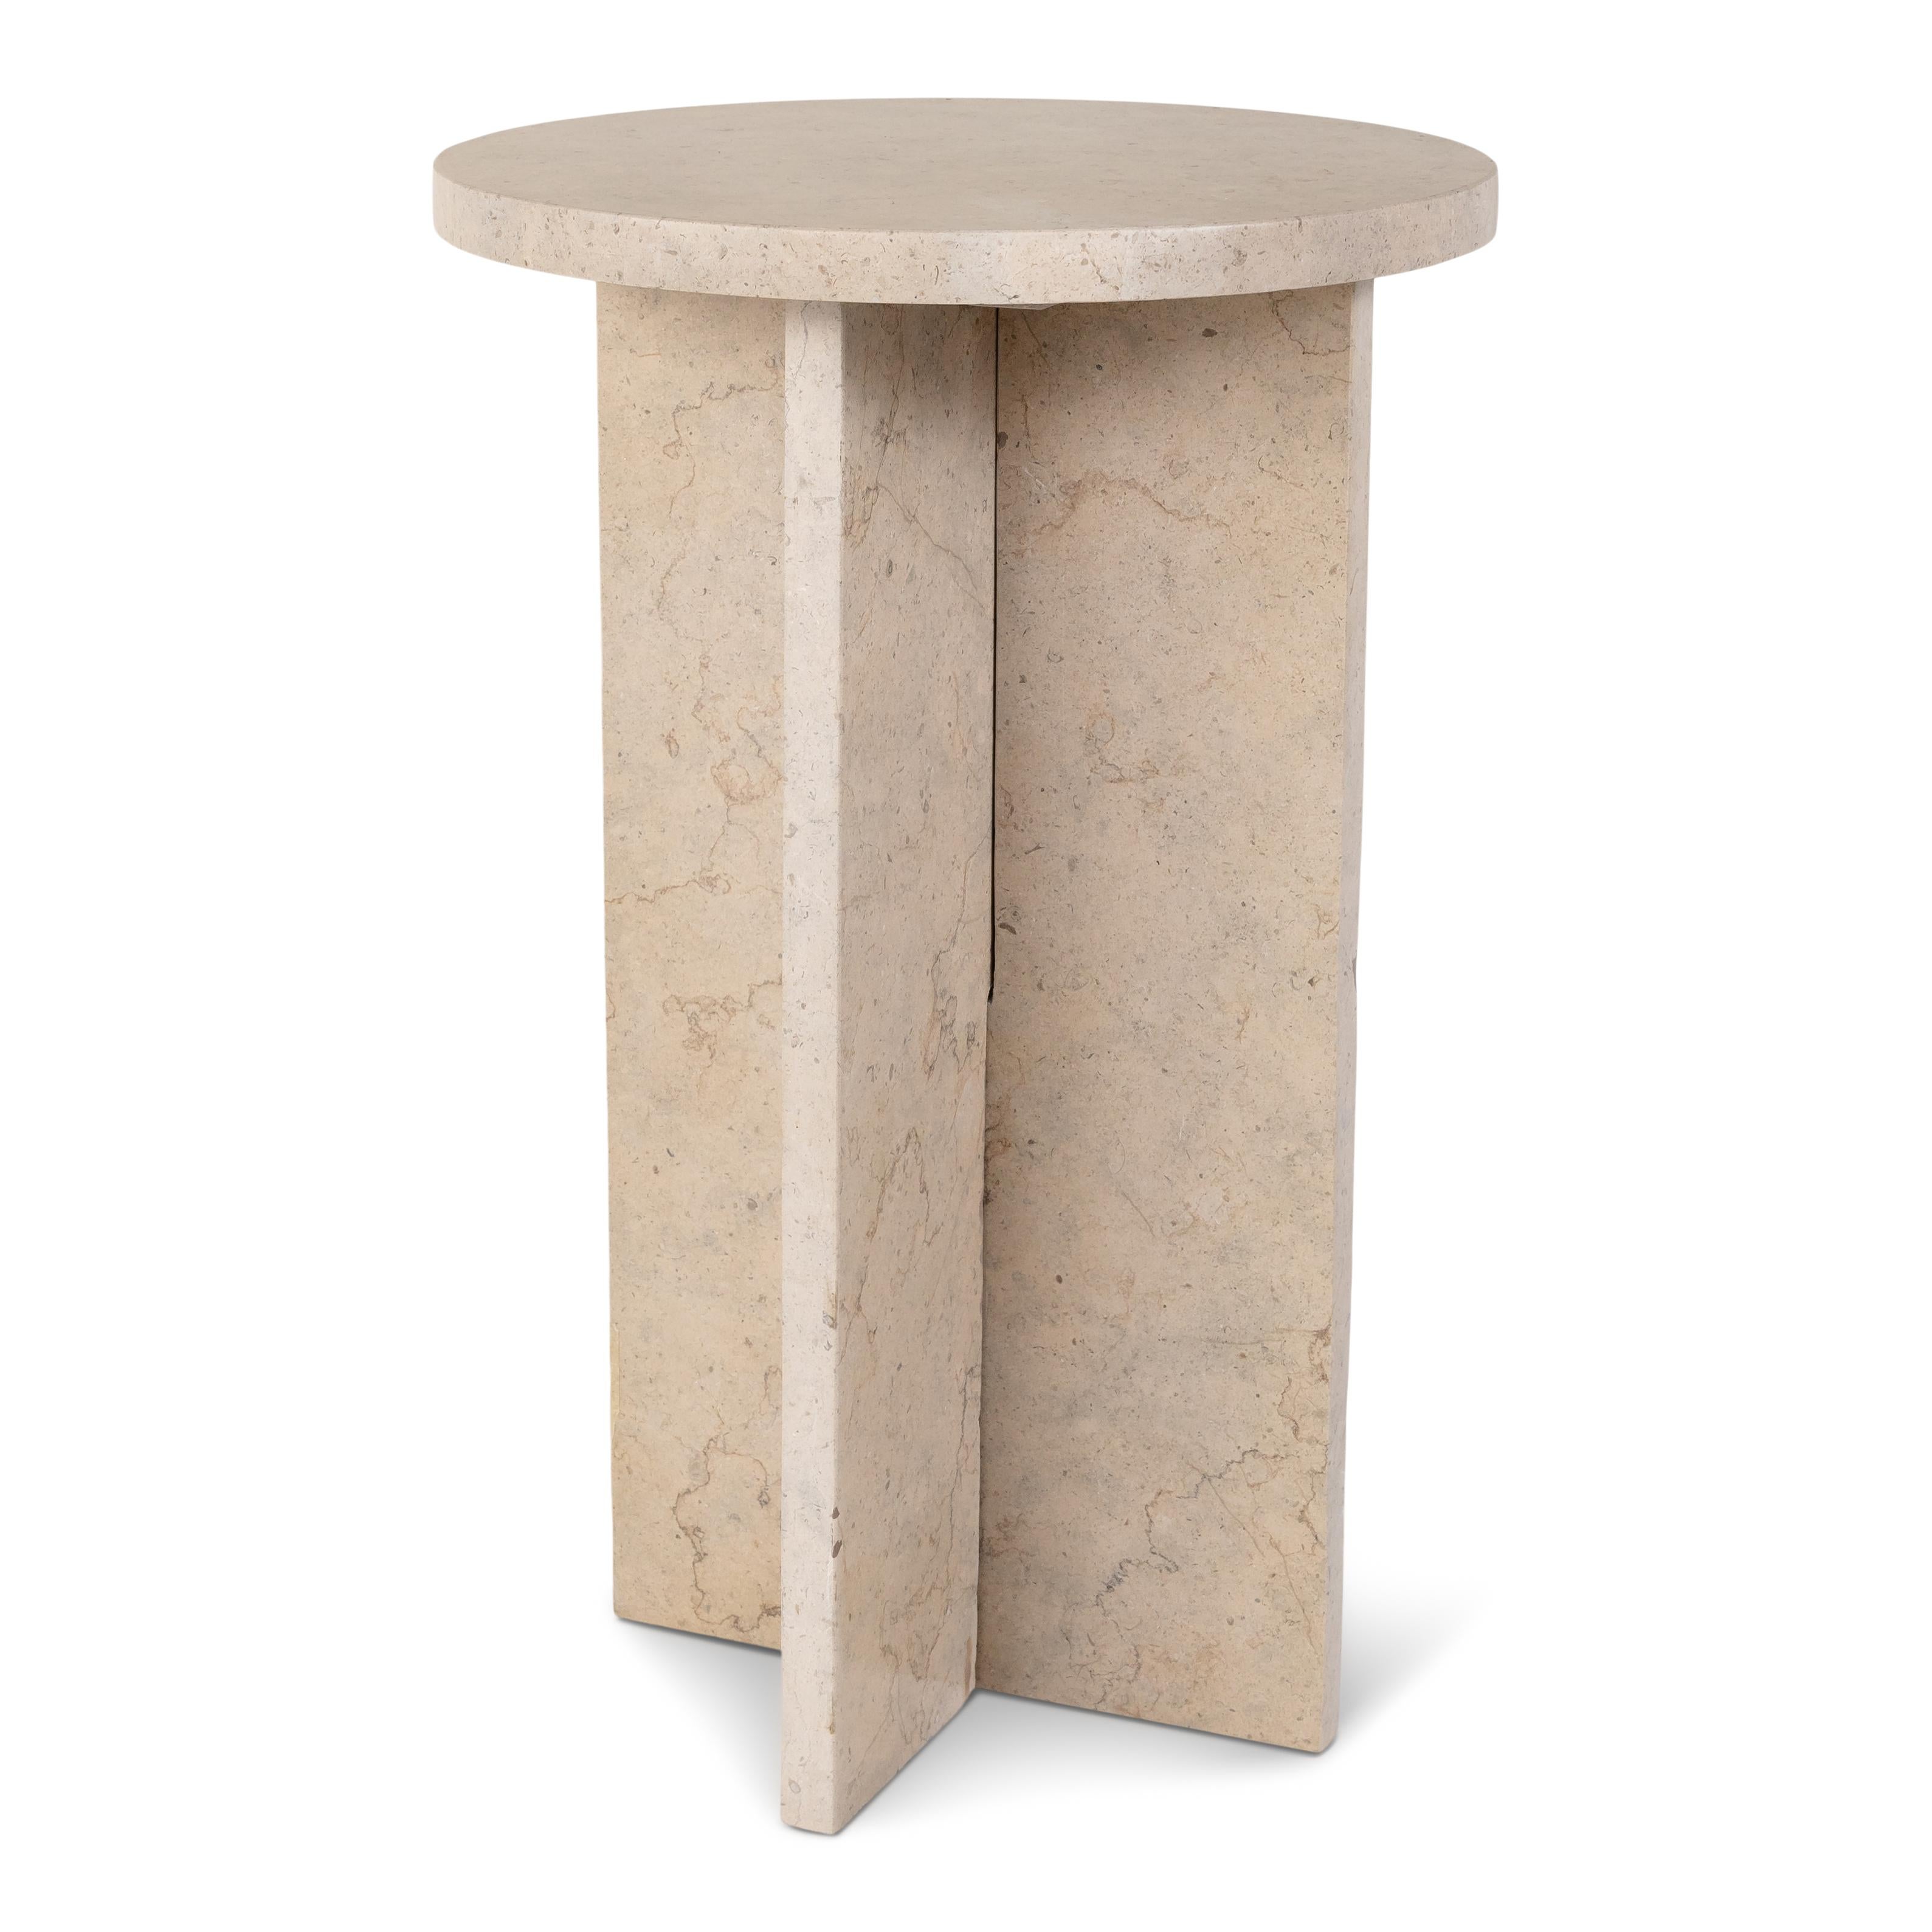 Side table in cross fitted, Lagos Azul limestone.

This item is crafted from natural materials. Coloring and detailing may vary, adding to its uniqueness. 

This item is custom and will have a 9-10 week lead time. 

A passion project of